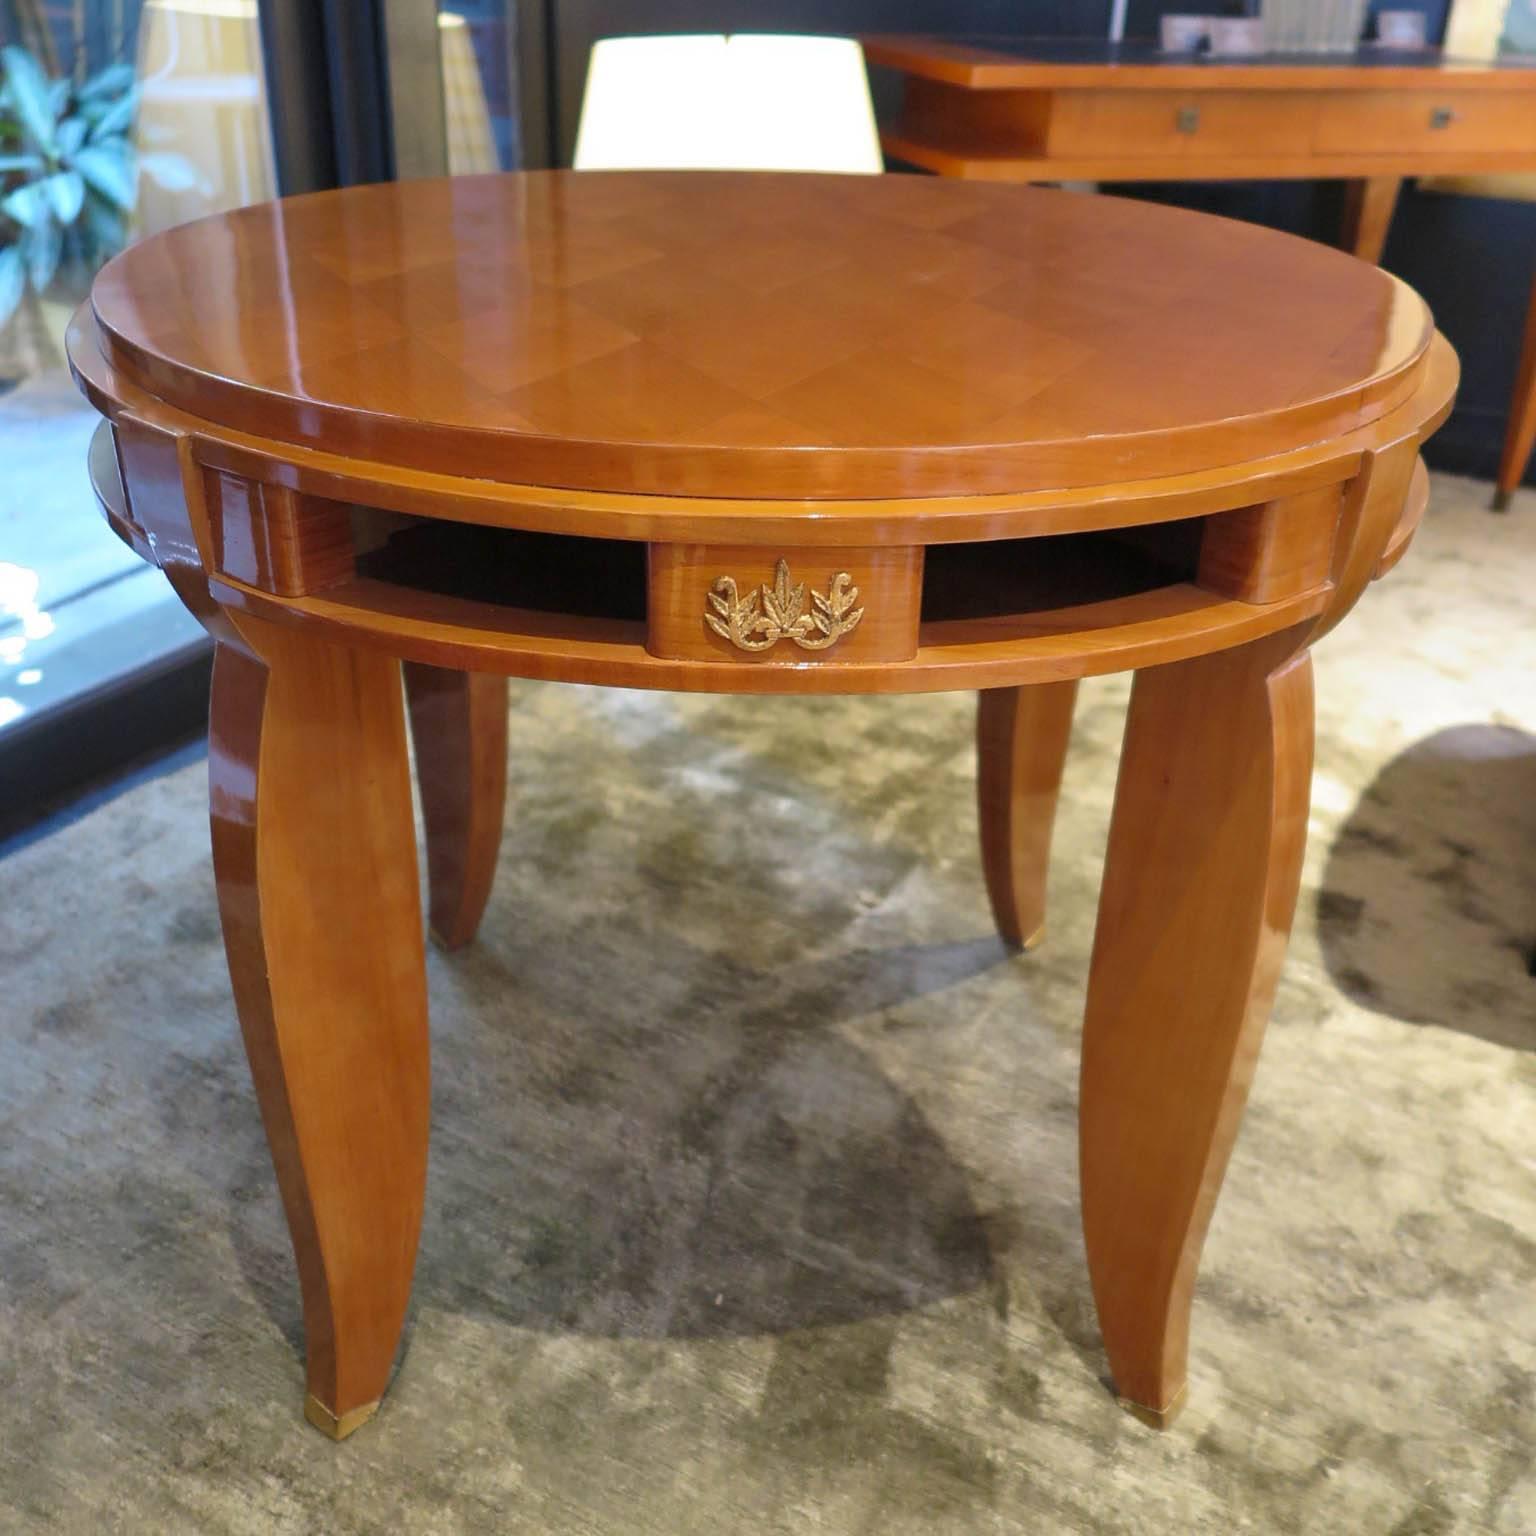 Large round side table in fruitwood with sycamore parquetry on top. Four gold leaf floral details on apron with eight inches. Four gold leafed sabots. By Jules Leleu.